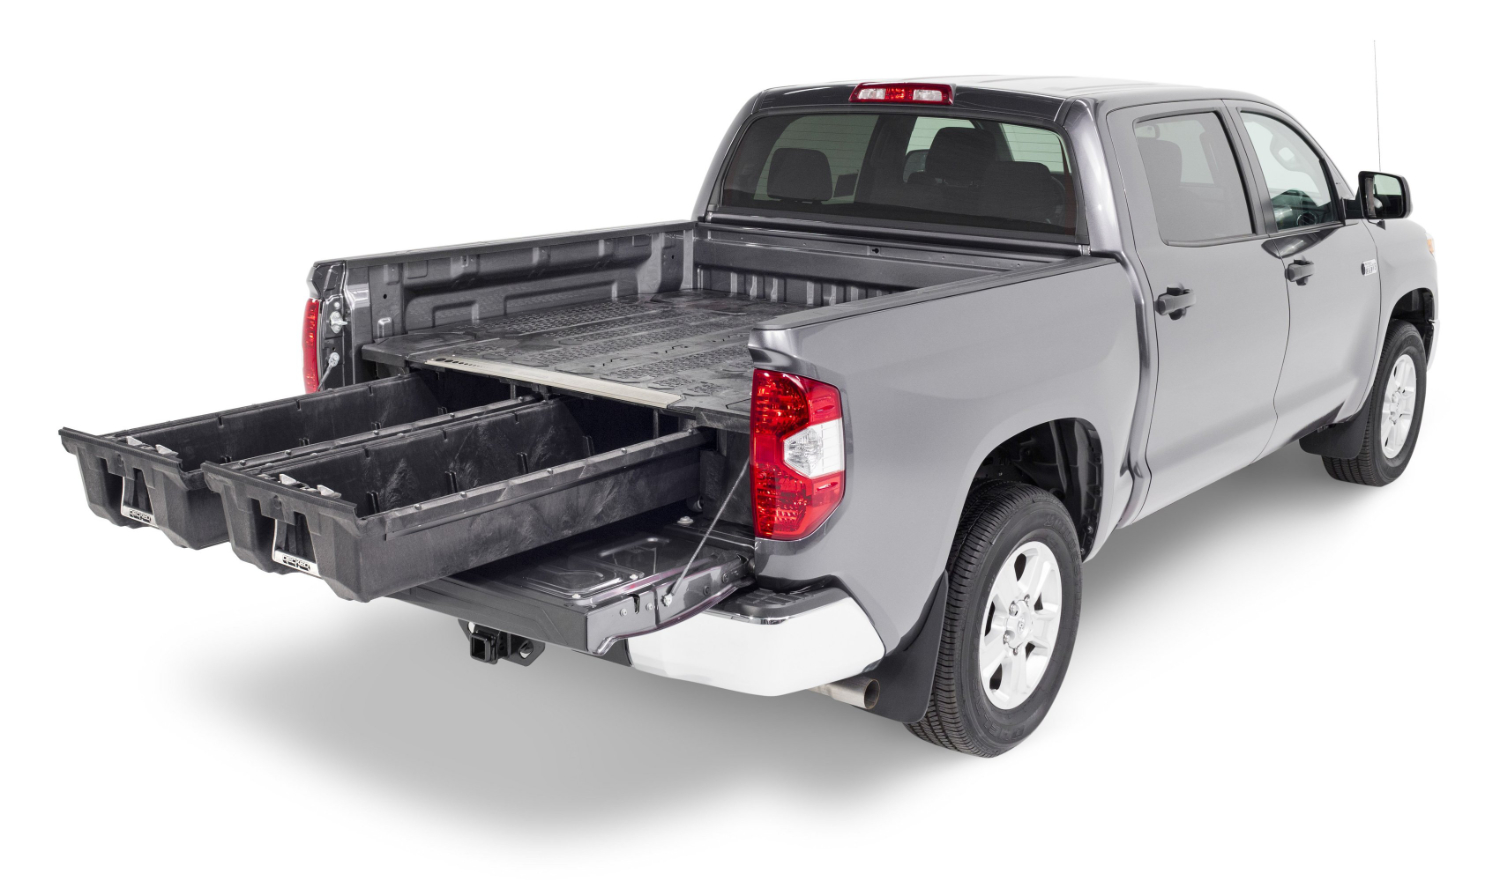 DECKED DRAWERS GRAY TOYOTA TRUCK